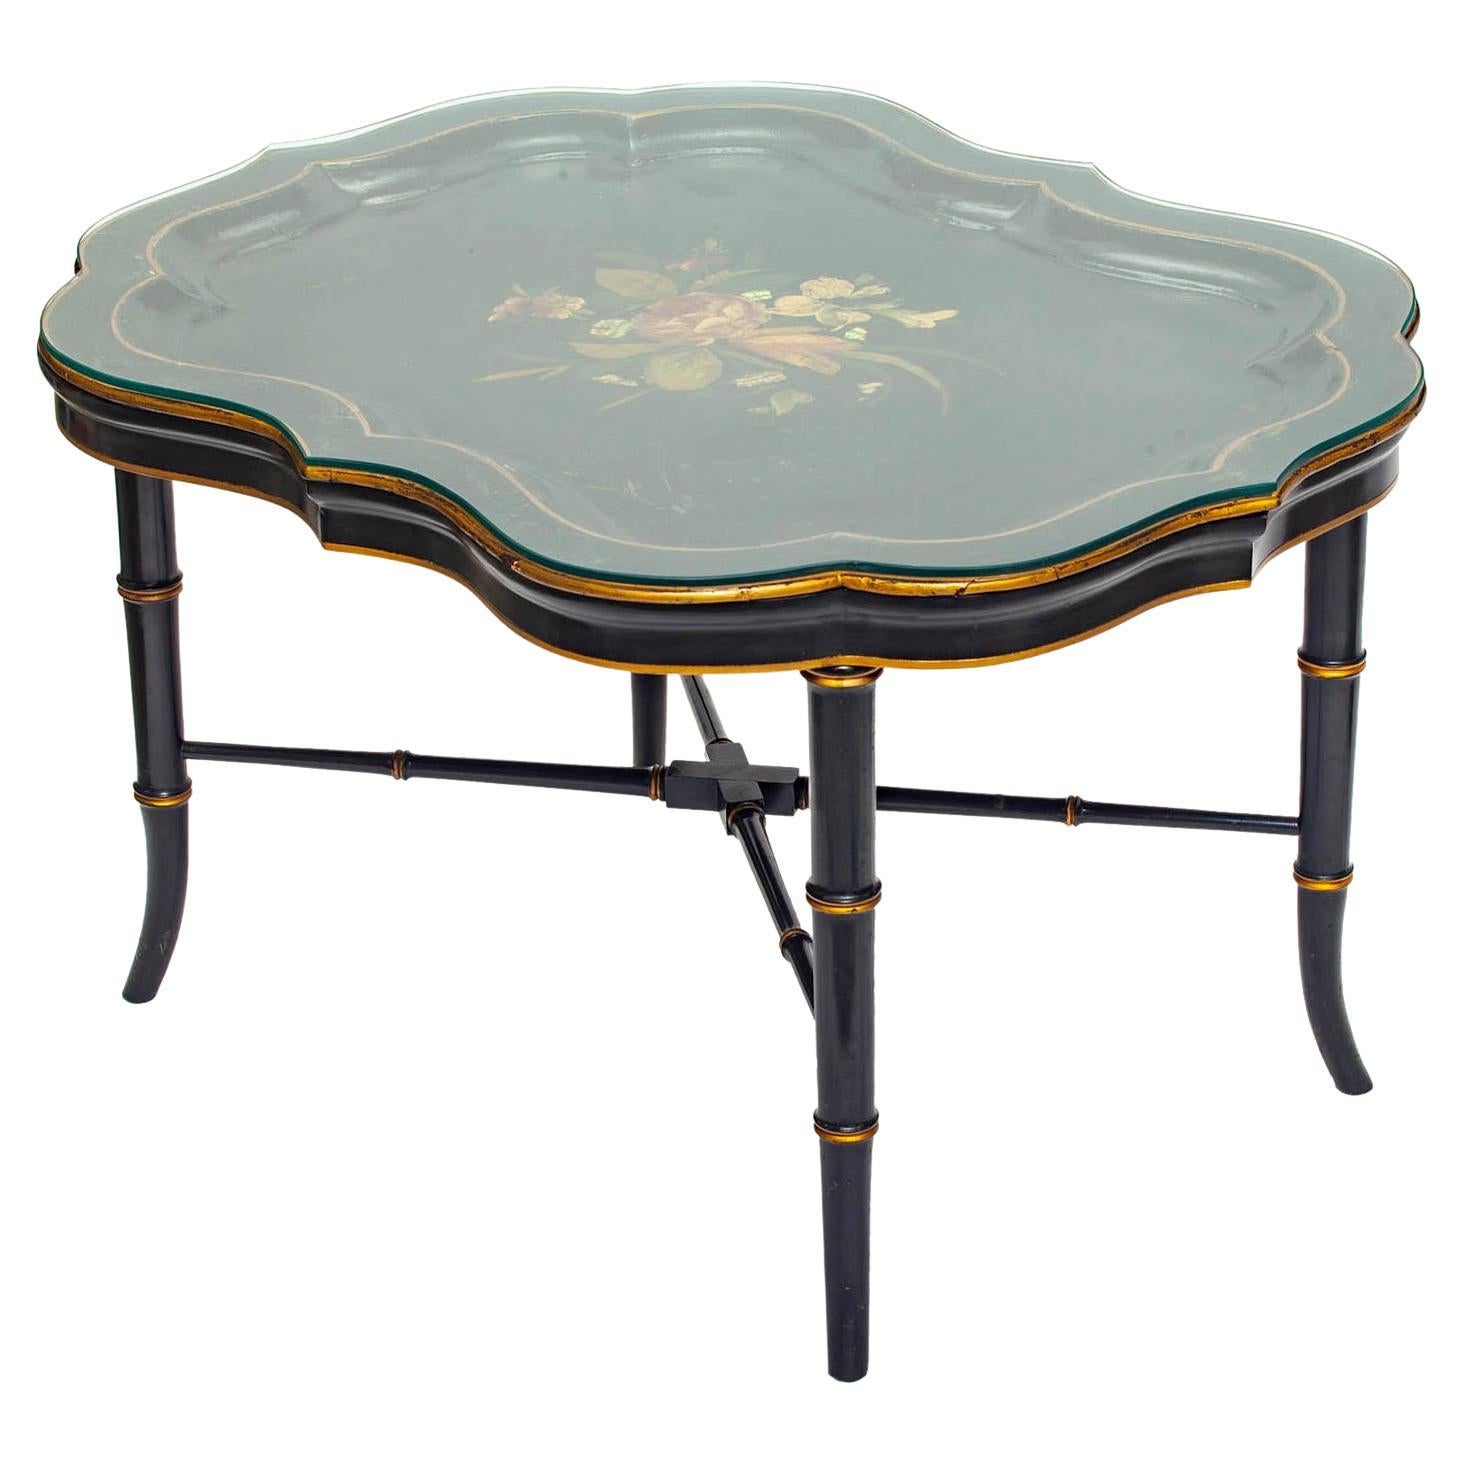 French Provincial Antique Ebony Tray Table with Glass Top- 3 Pieces For Sale